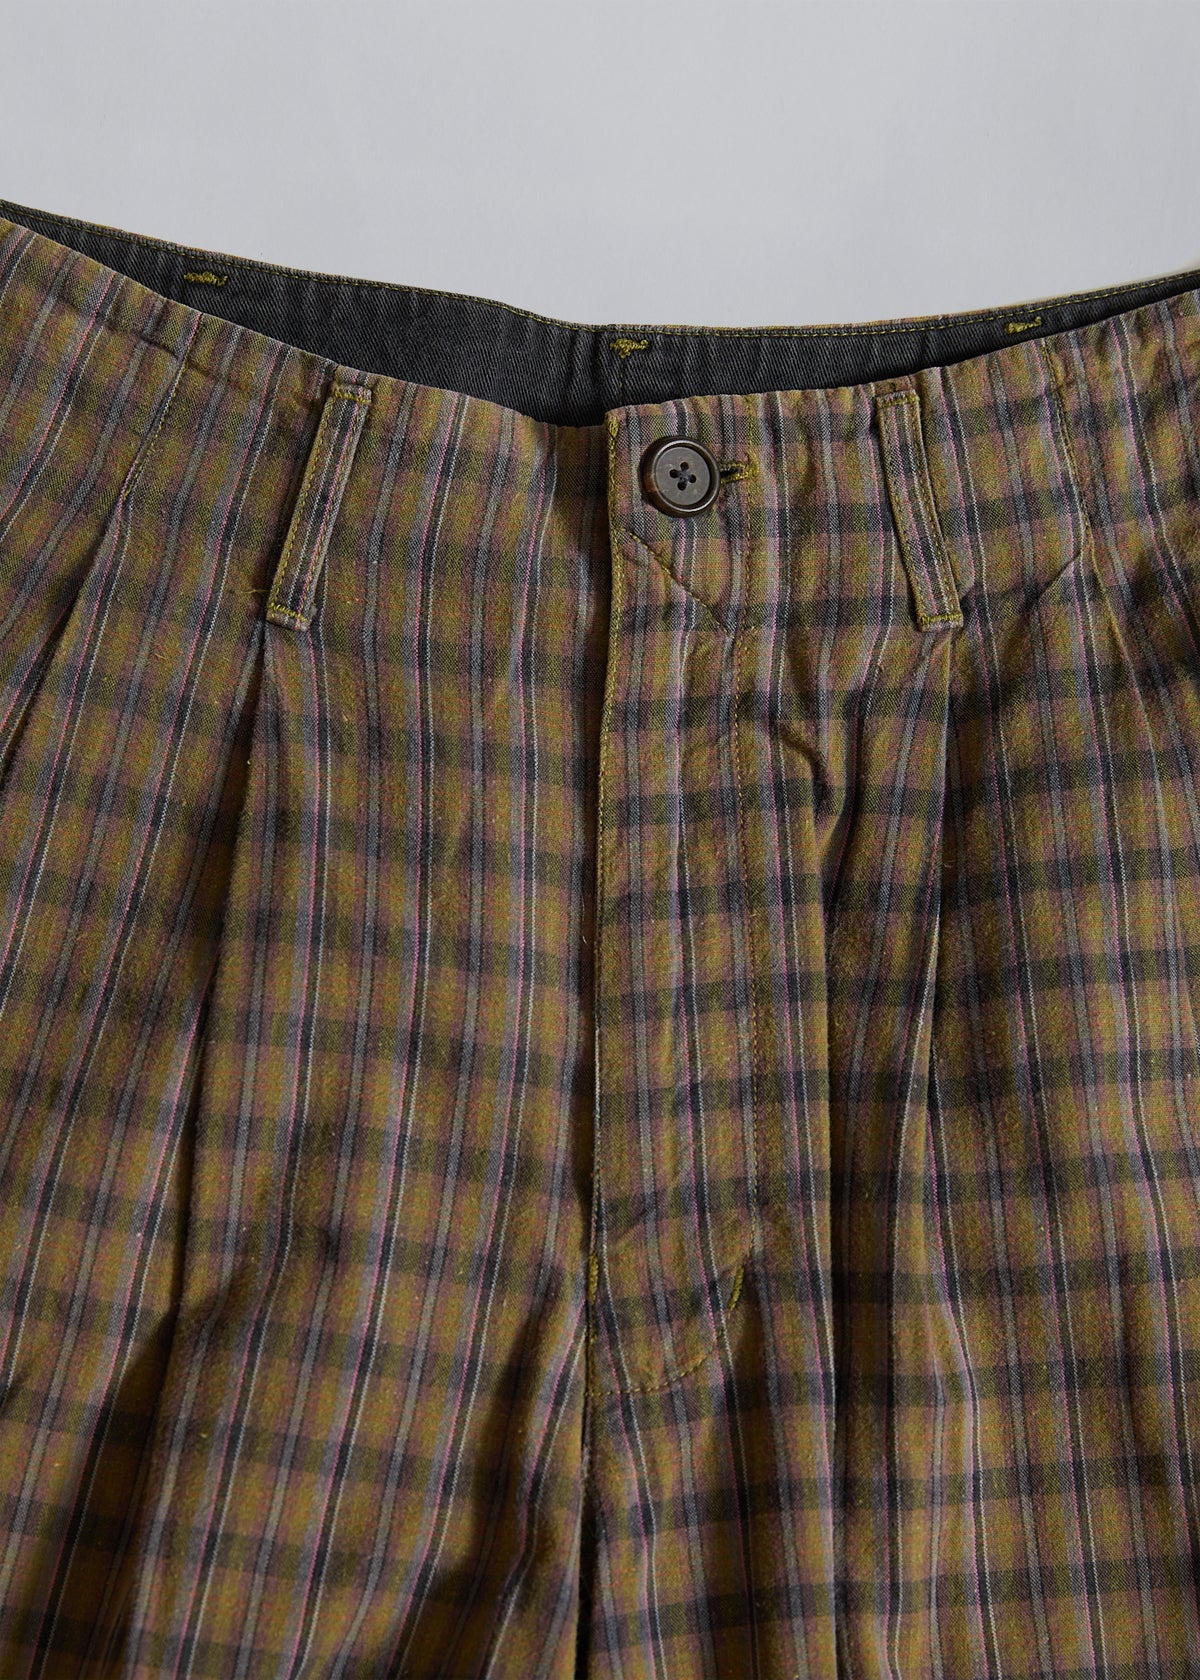 Brown Checkered Light Cotton Shorts 1990's - 32